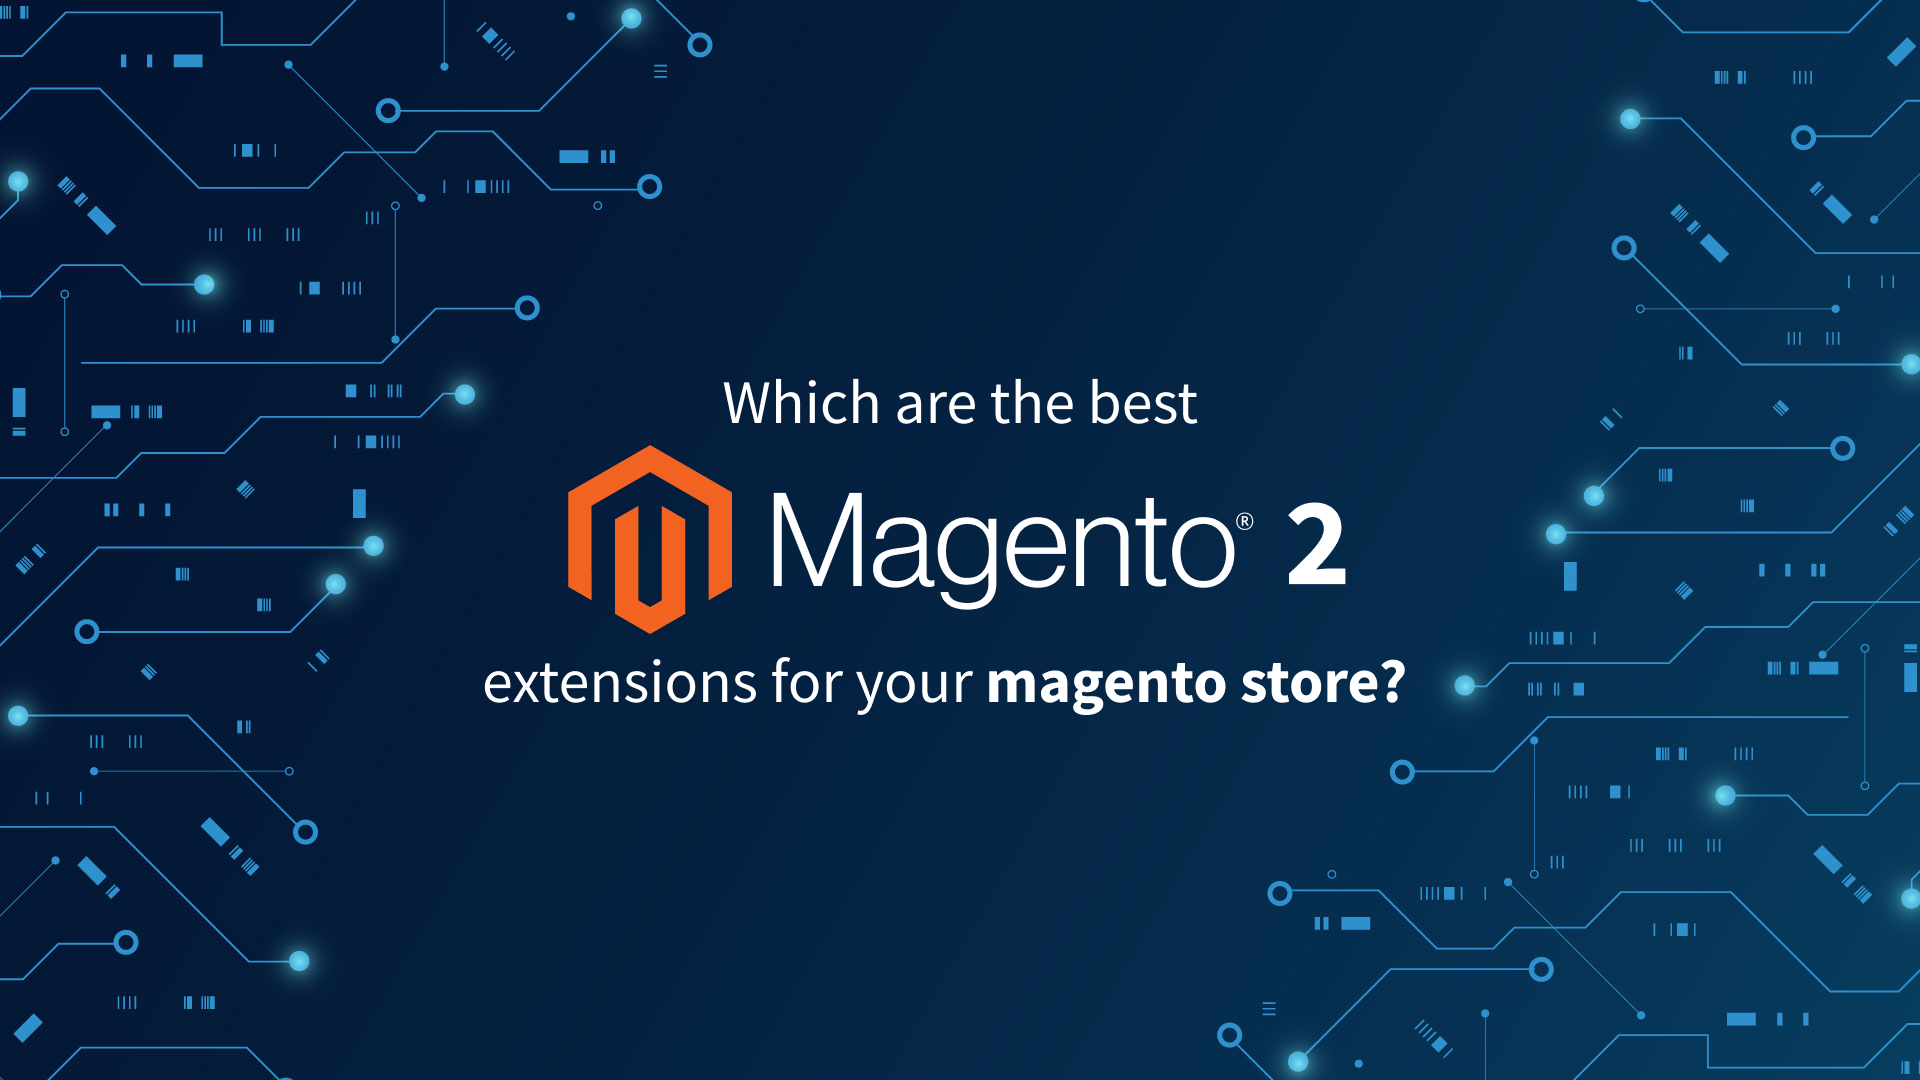 Which are the best Magento 2 extensions for your Magento store?